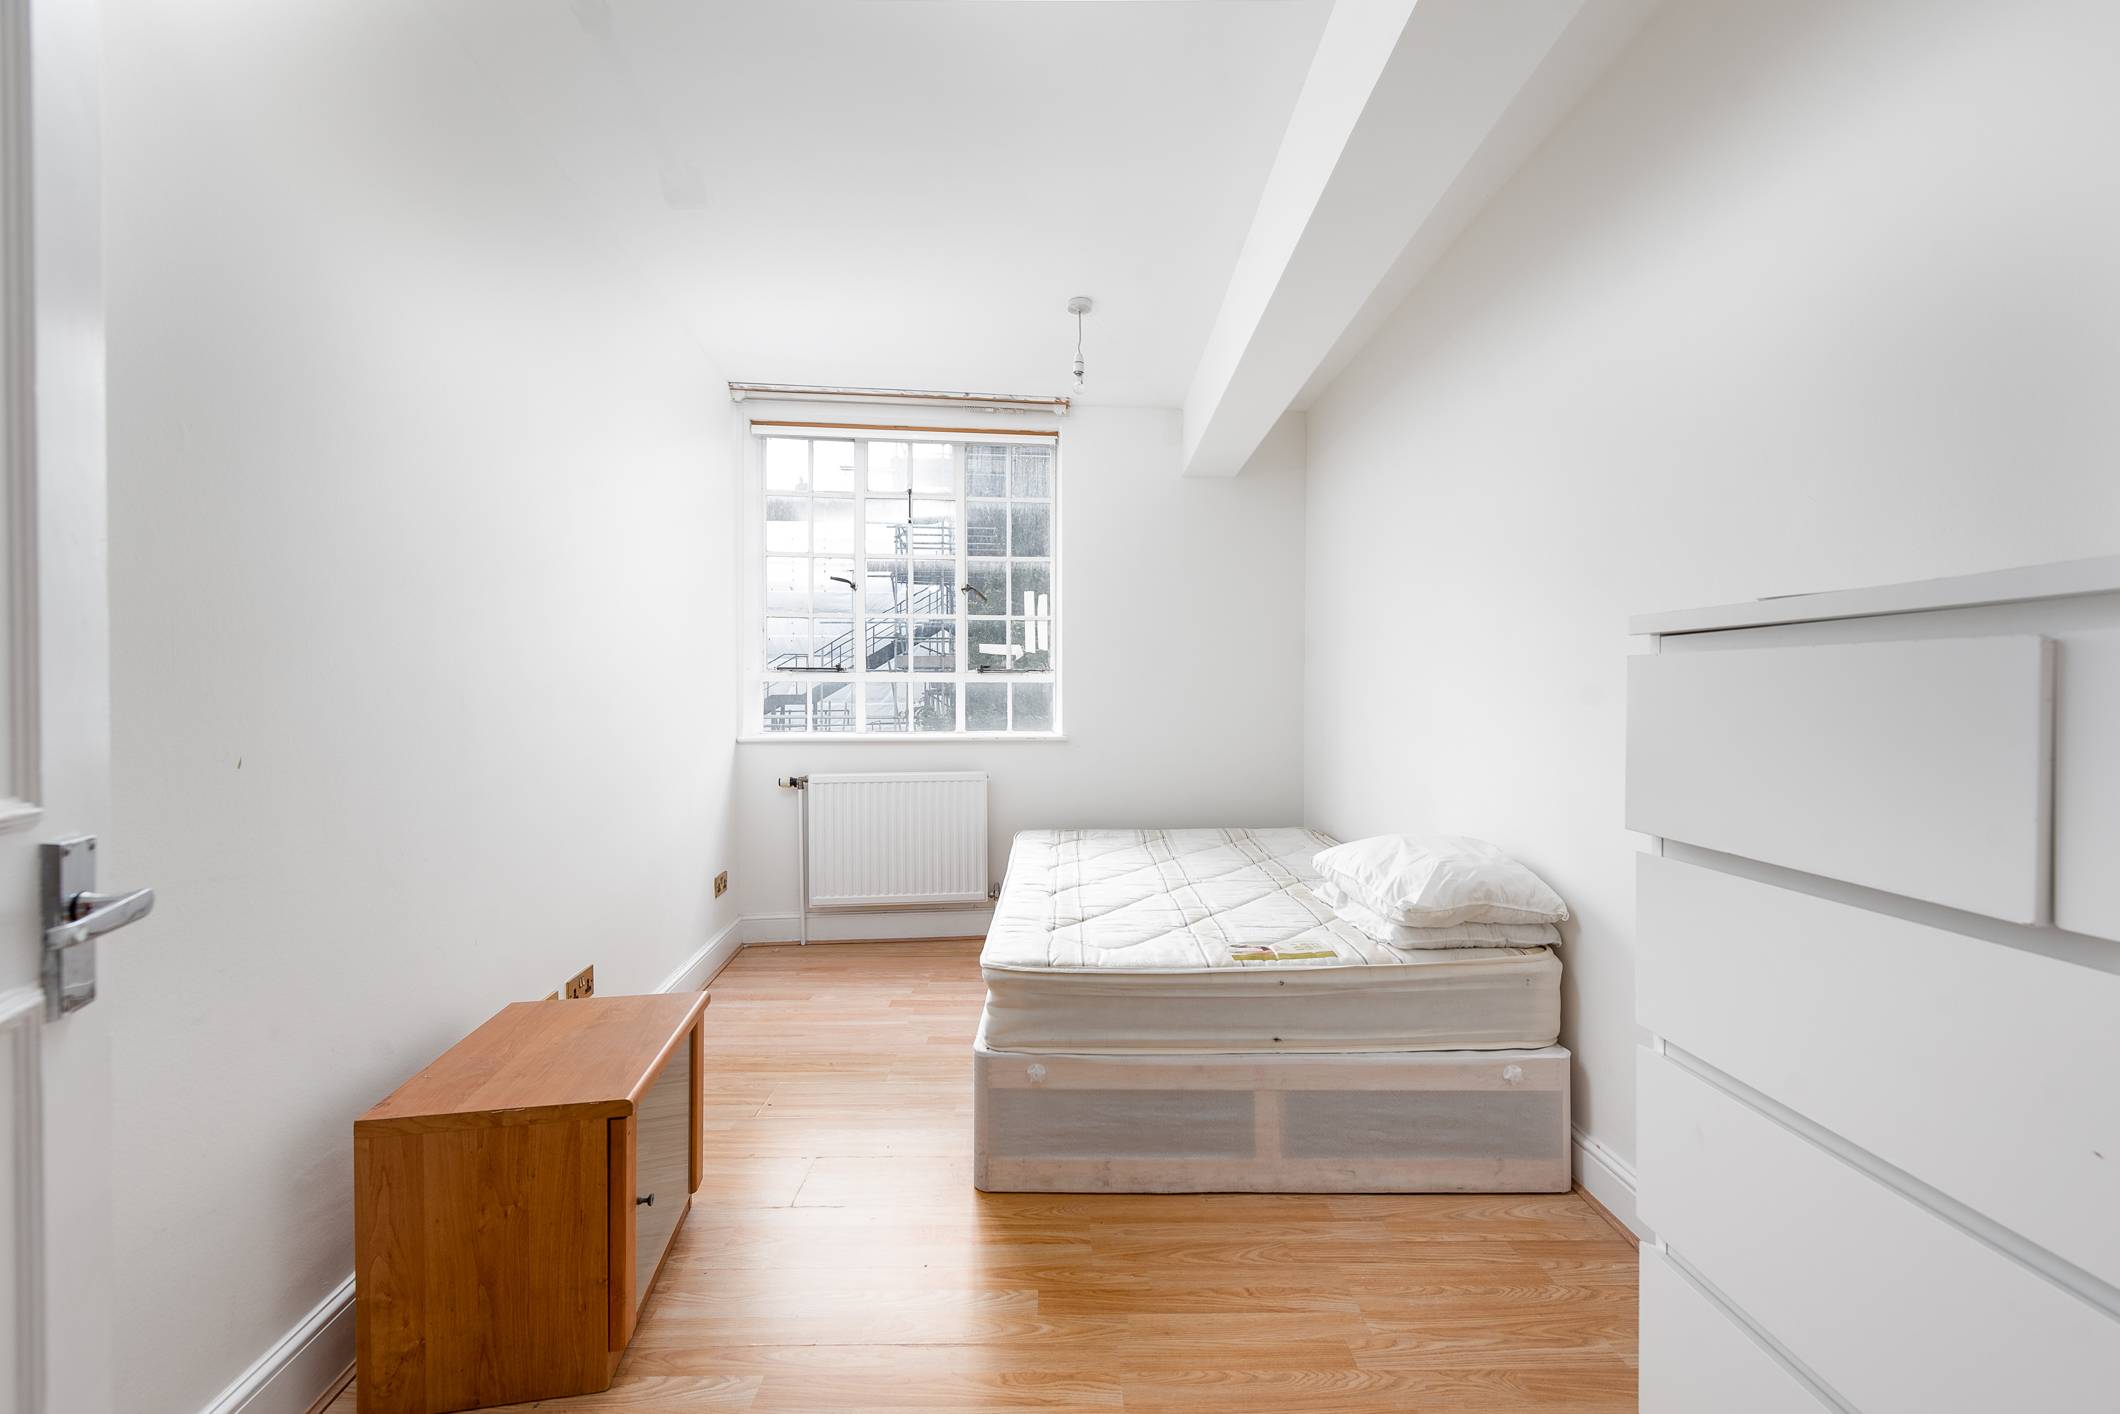 One Bedroom Apartment in The Heart of Chelsea